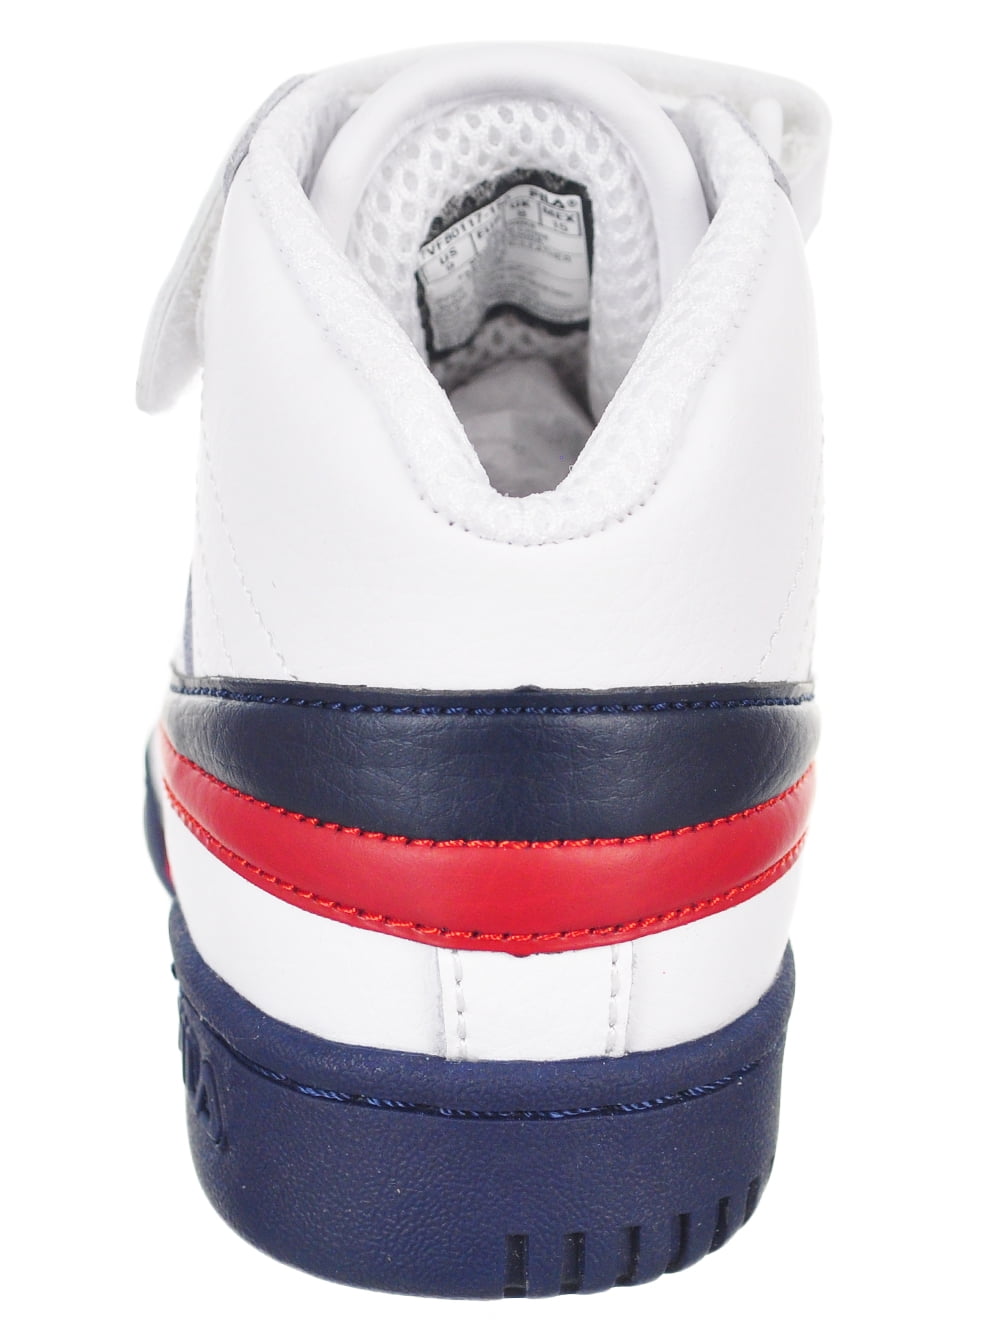 Fila Boys' Heritage Mid-Top Sneakers - white/navy/red, 9 toddler